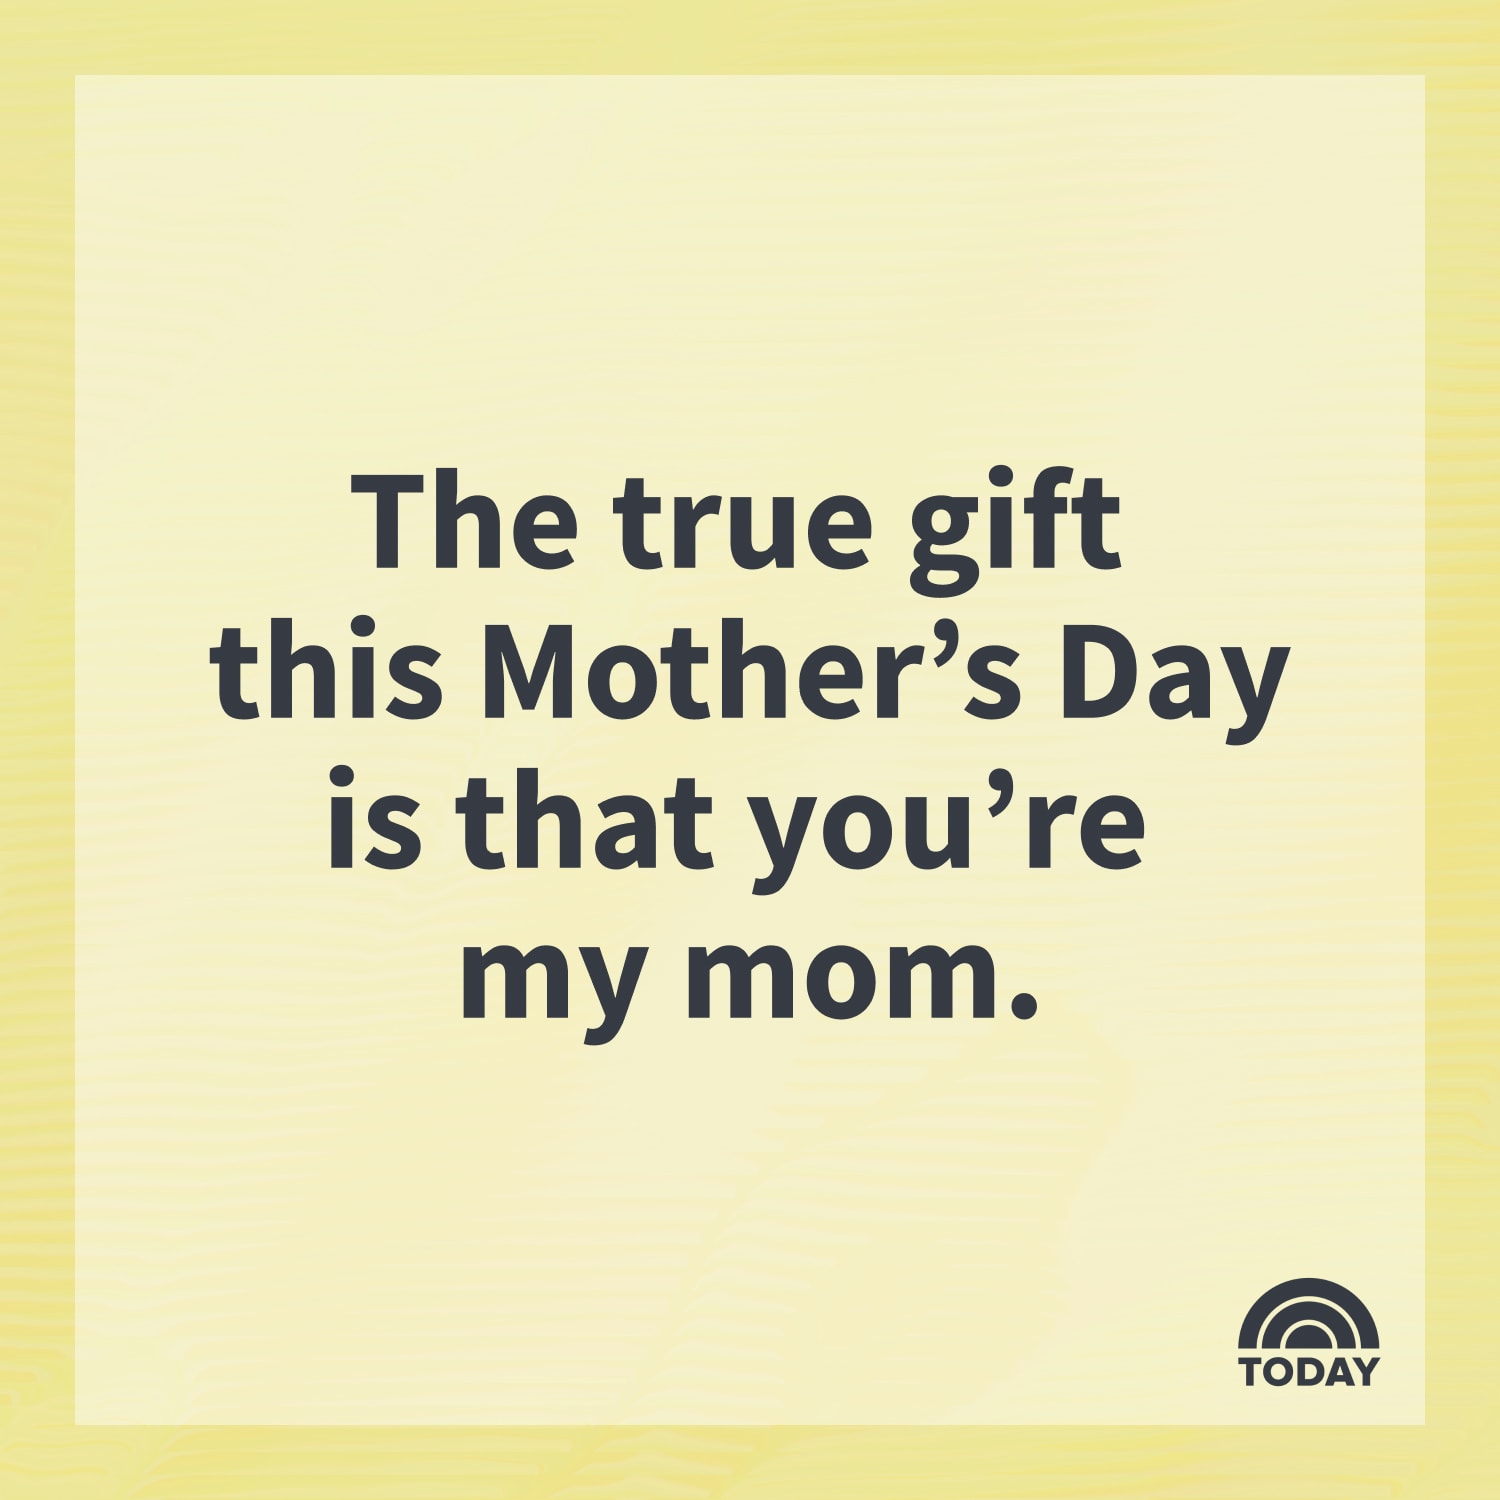 bridget tan recommends Stepmom Mothers Day Quotes